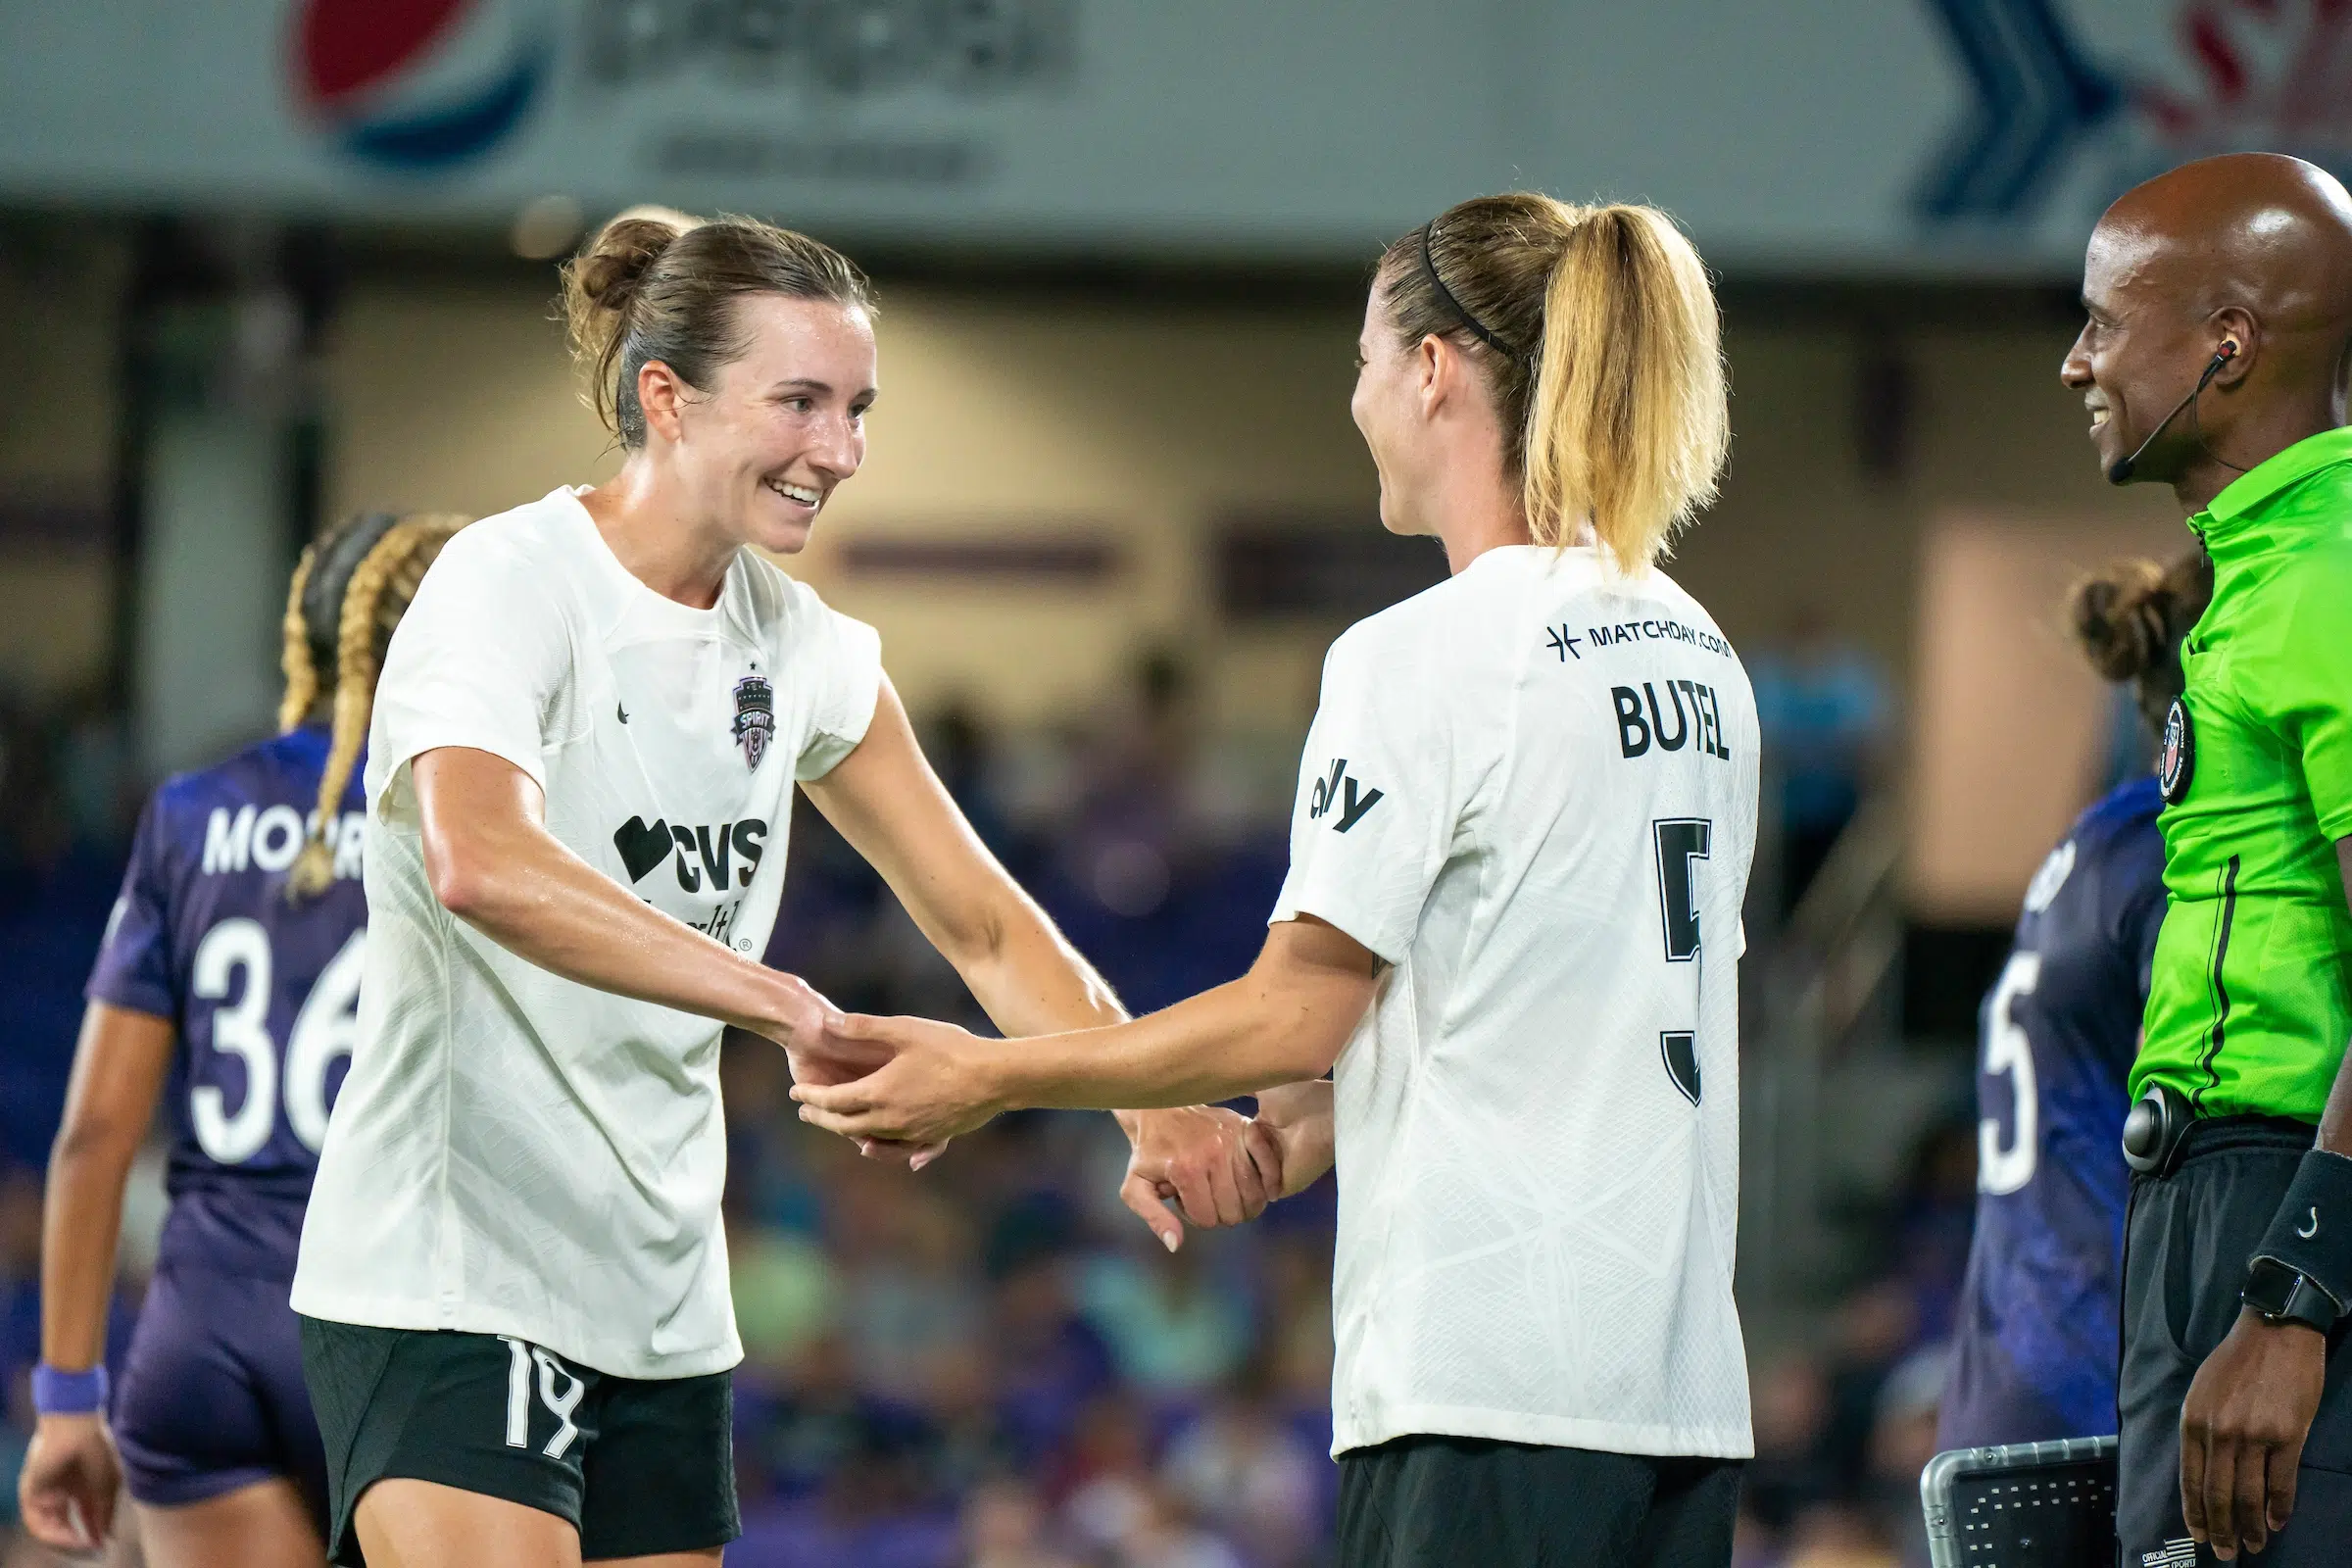 Two soccer players in white tops and black shorts shake hands as they walk off a field.